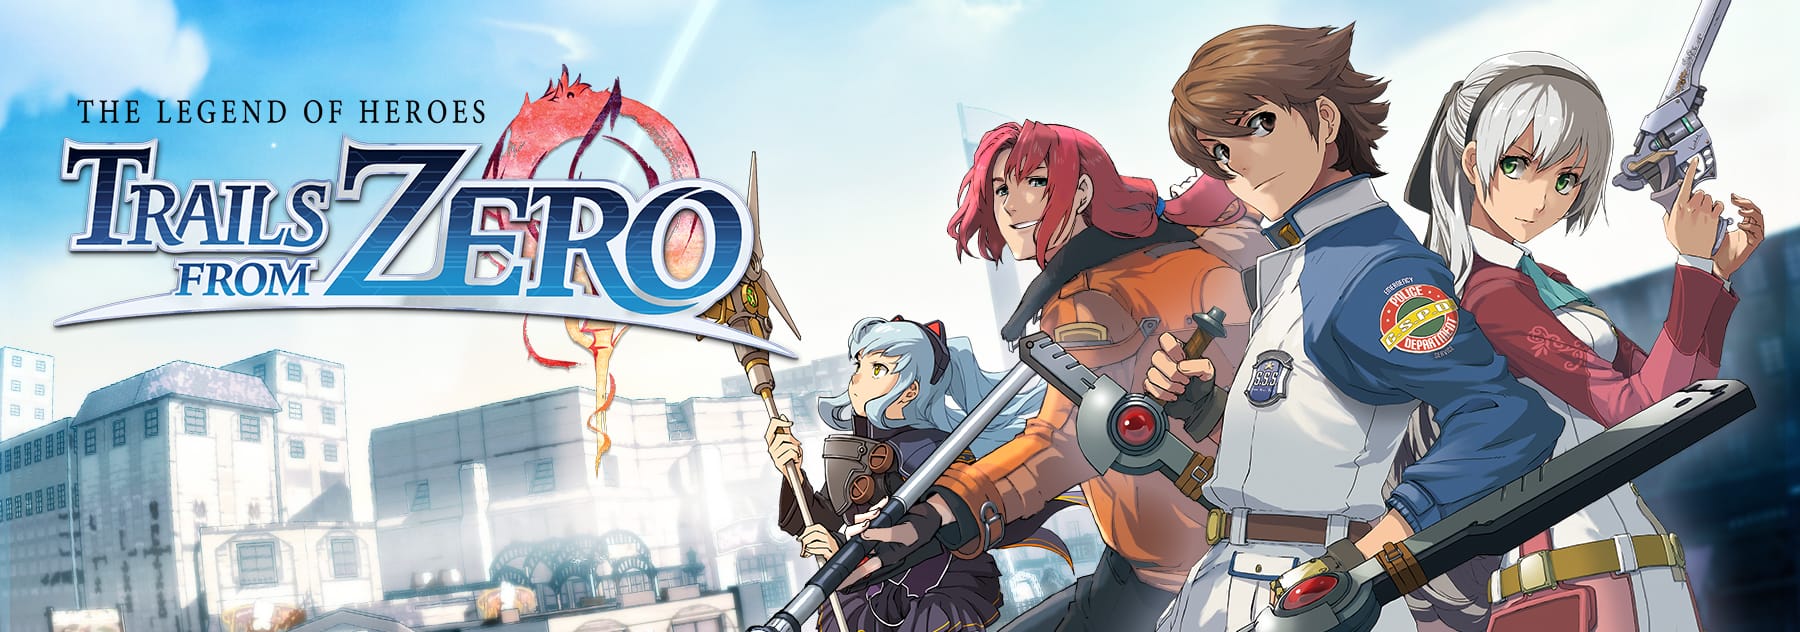 for iphone download The Legend of Heroes: Trails from Zero free